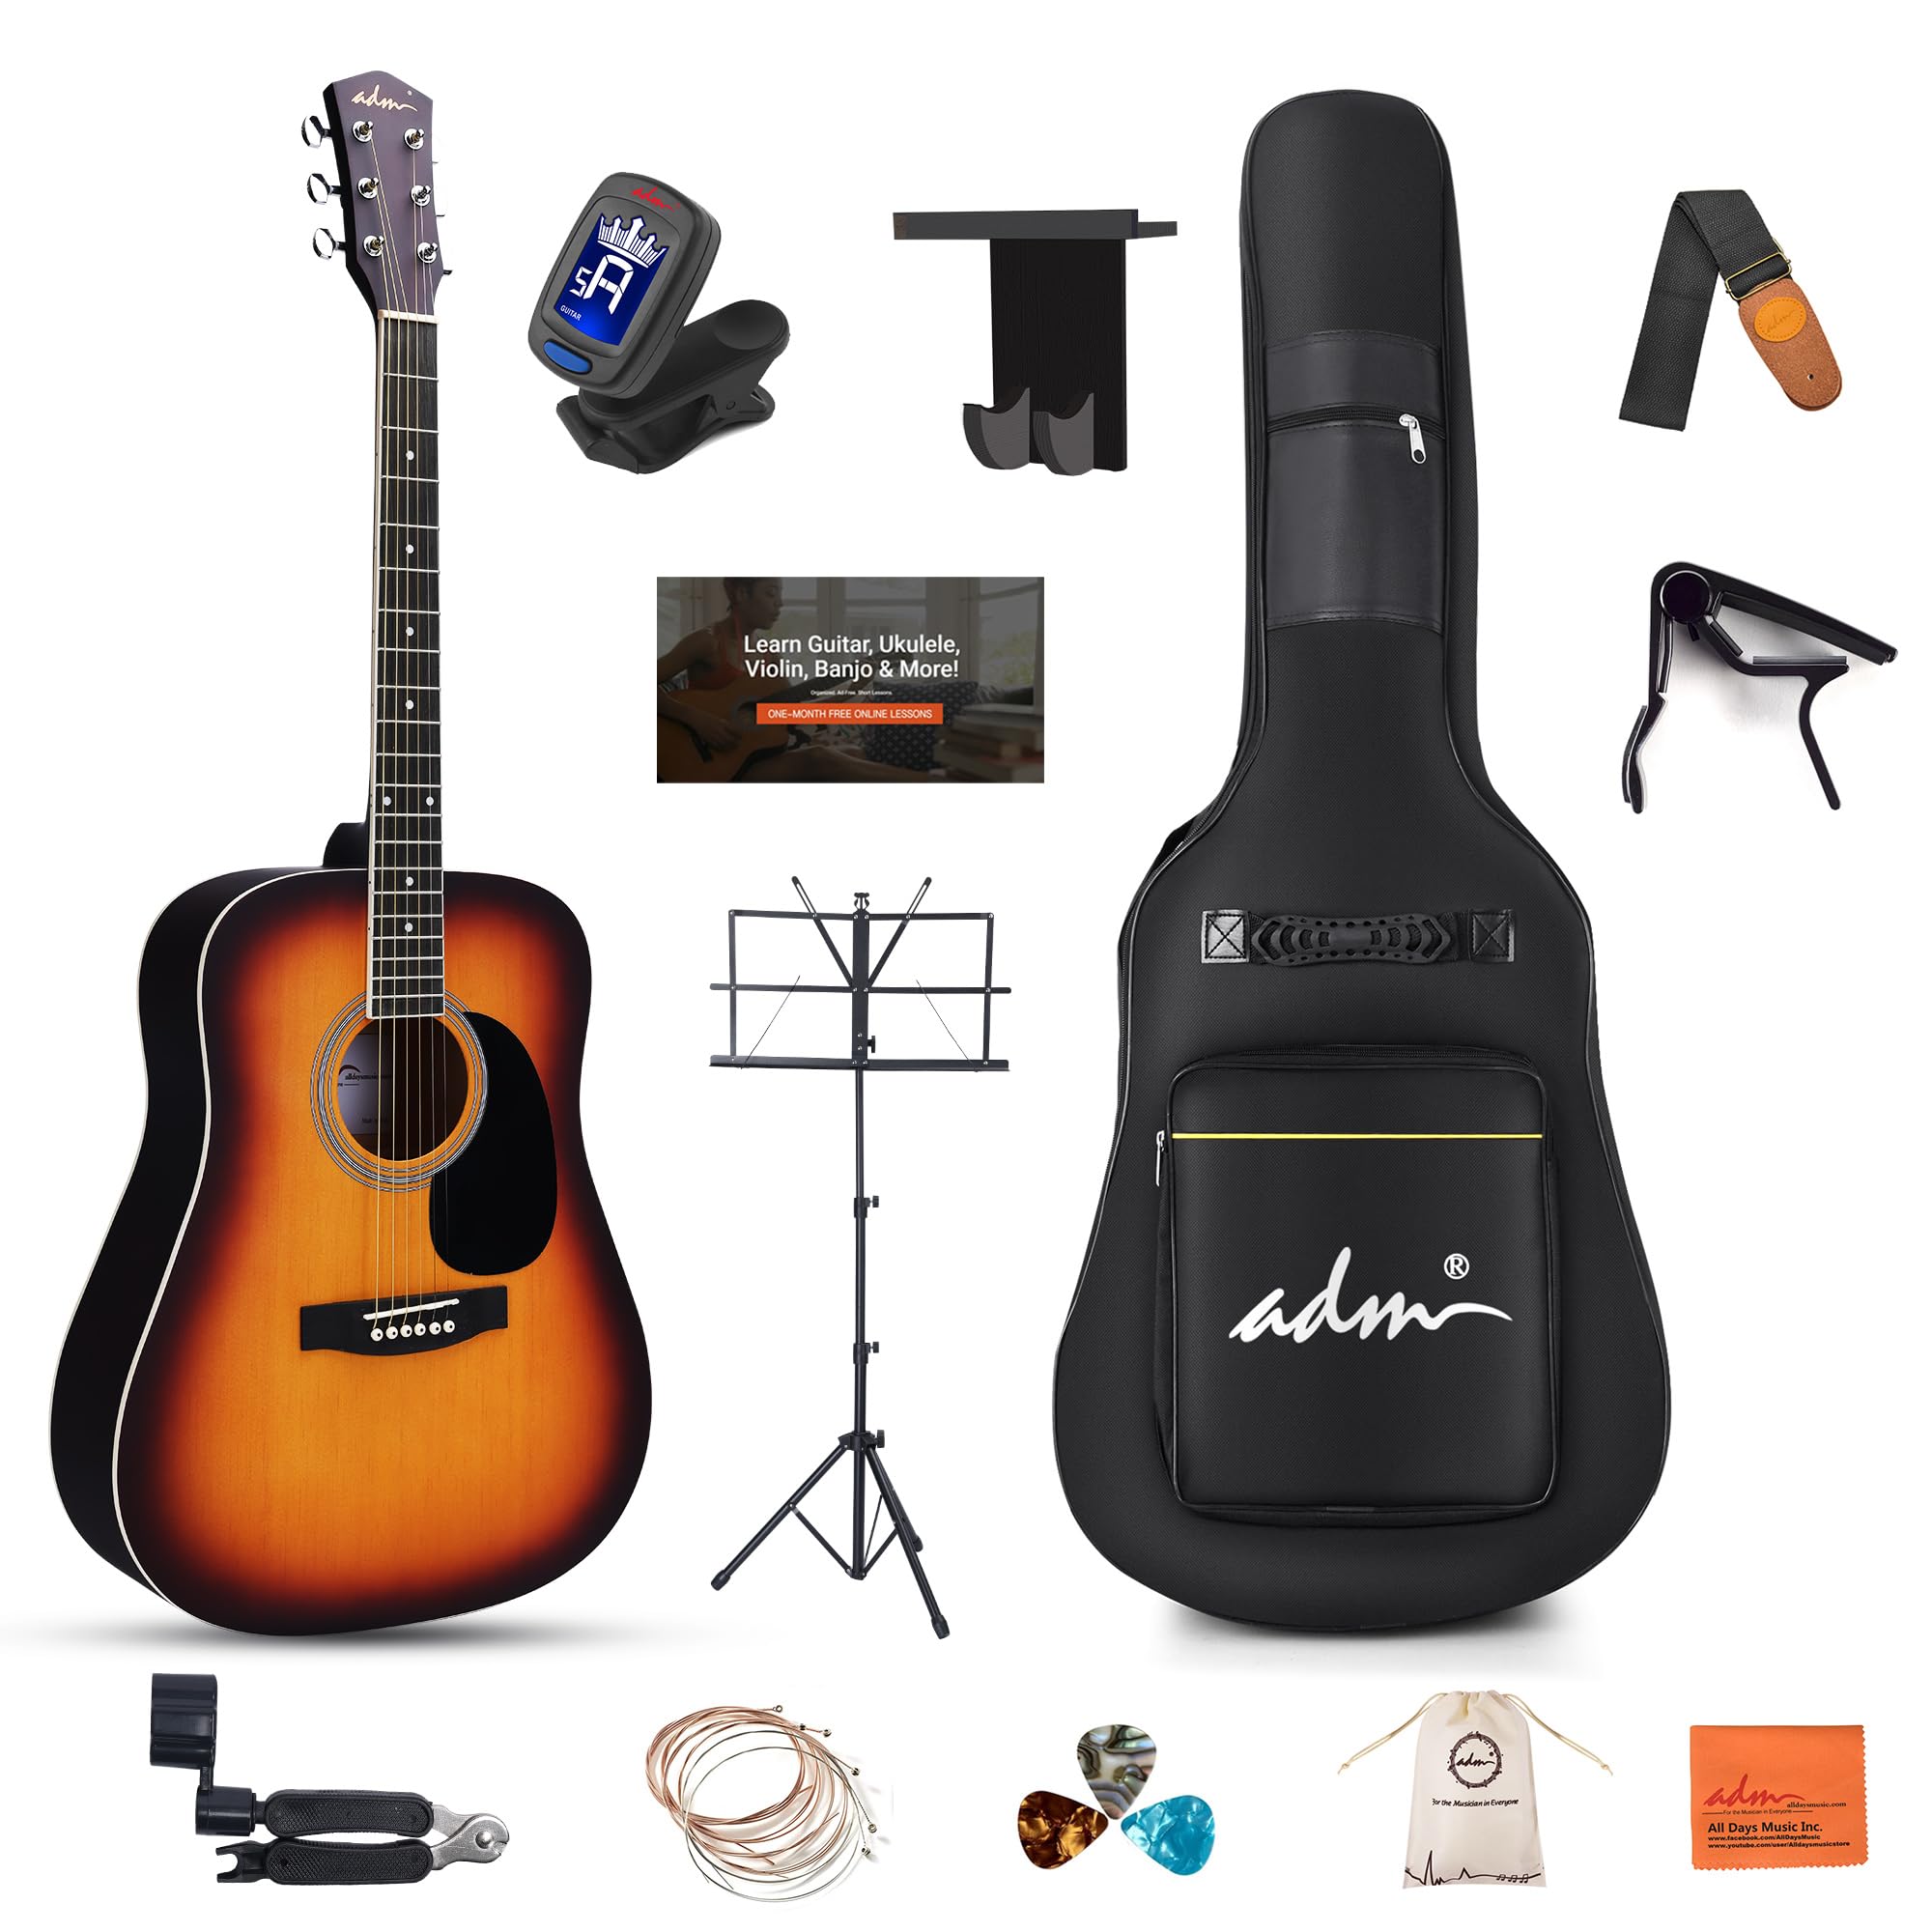 ADM Dreadnought Acoustic Guitar Kit with Free Online Lesson for Beginner Adult Teen Full Size Acustica Guitarra Starter Bundle Set with Bag Strap Tuner Capo Pickguard Music Stand, Right Hand 41 Inch